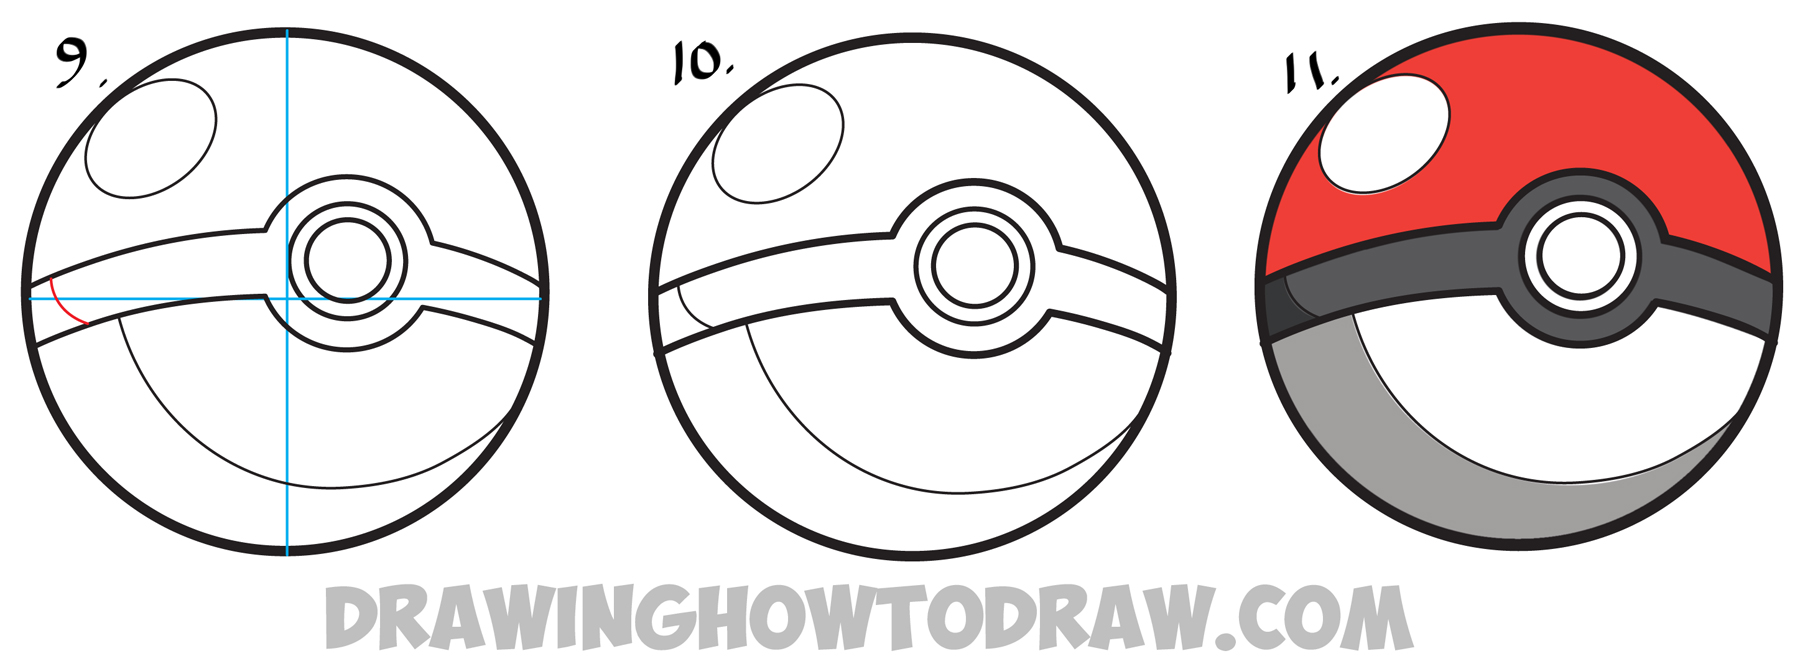 How to Draw a Pokemon Step by Step | Pokemon drawings, Pokemon, Easy  drawings